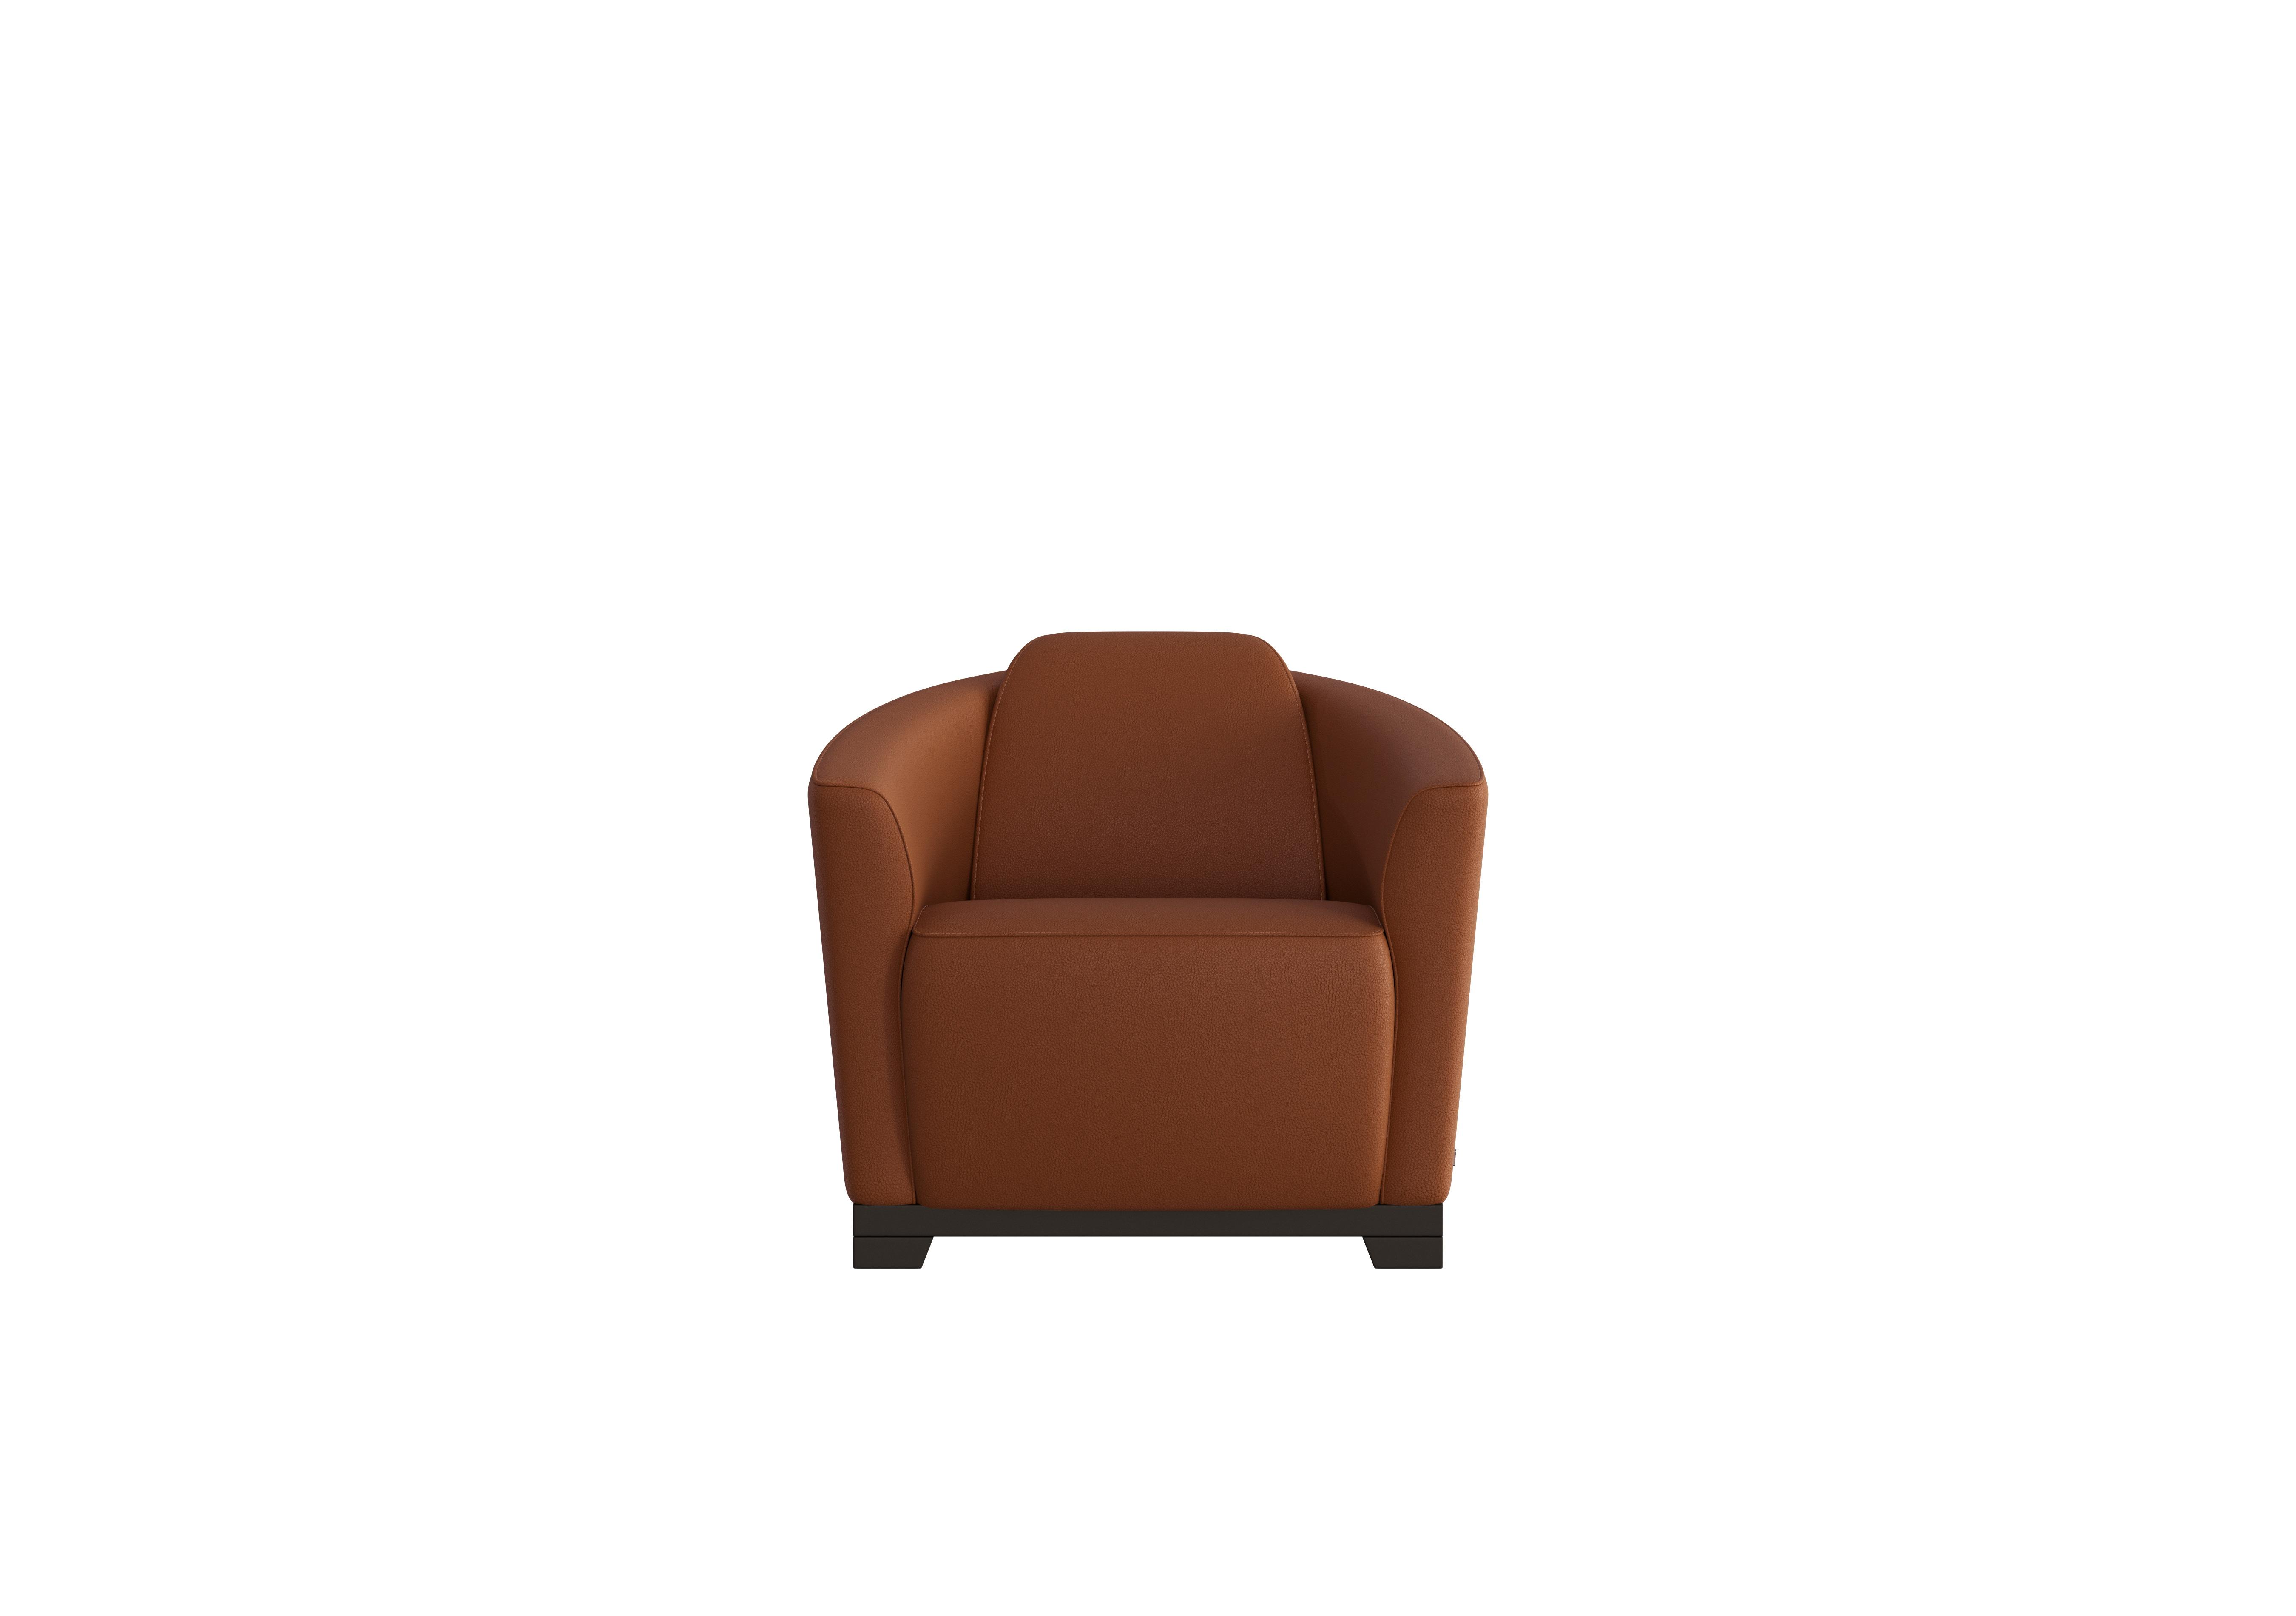 Ketty Leather Accent Chair in Botero Cuoio 2151 on Furniture Village